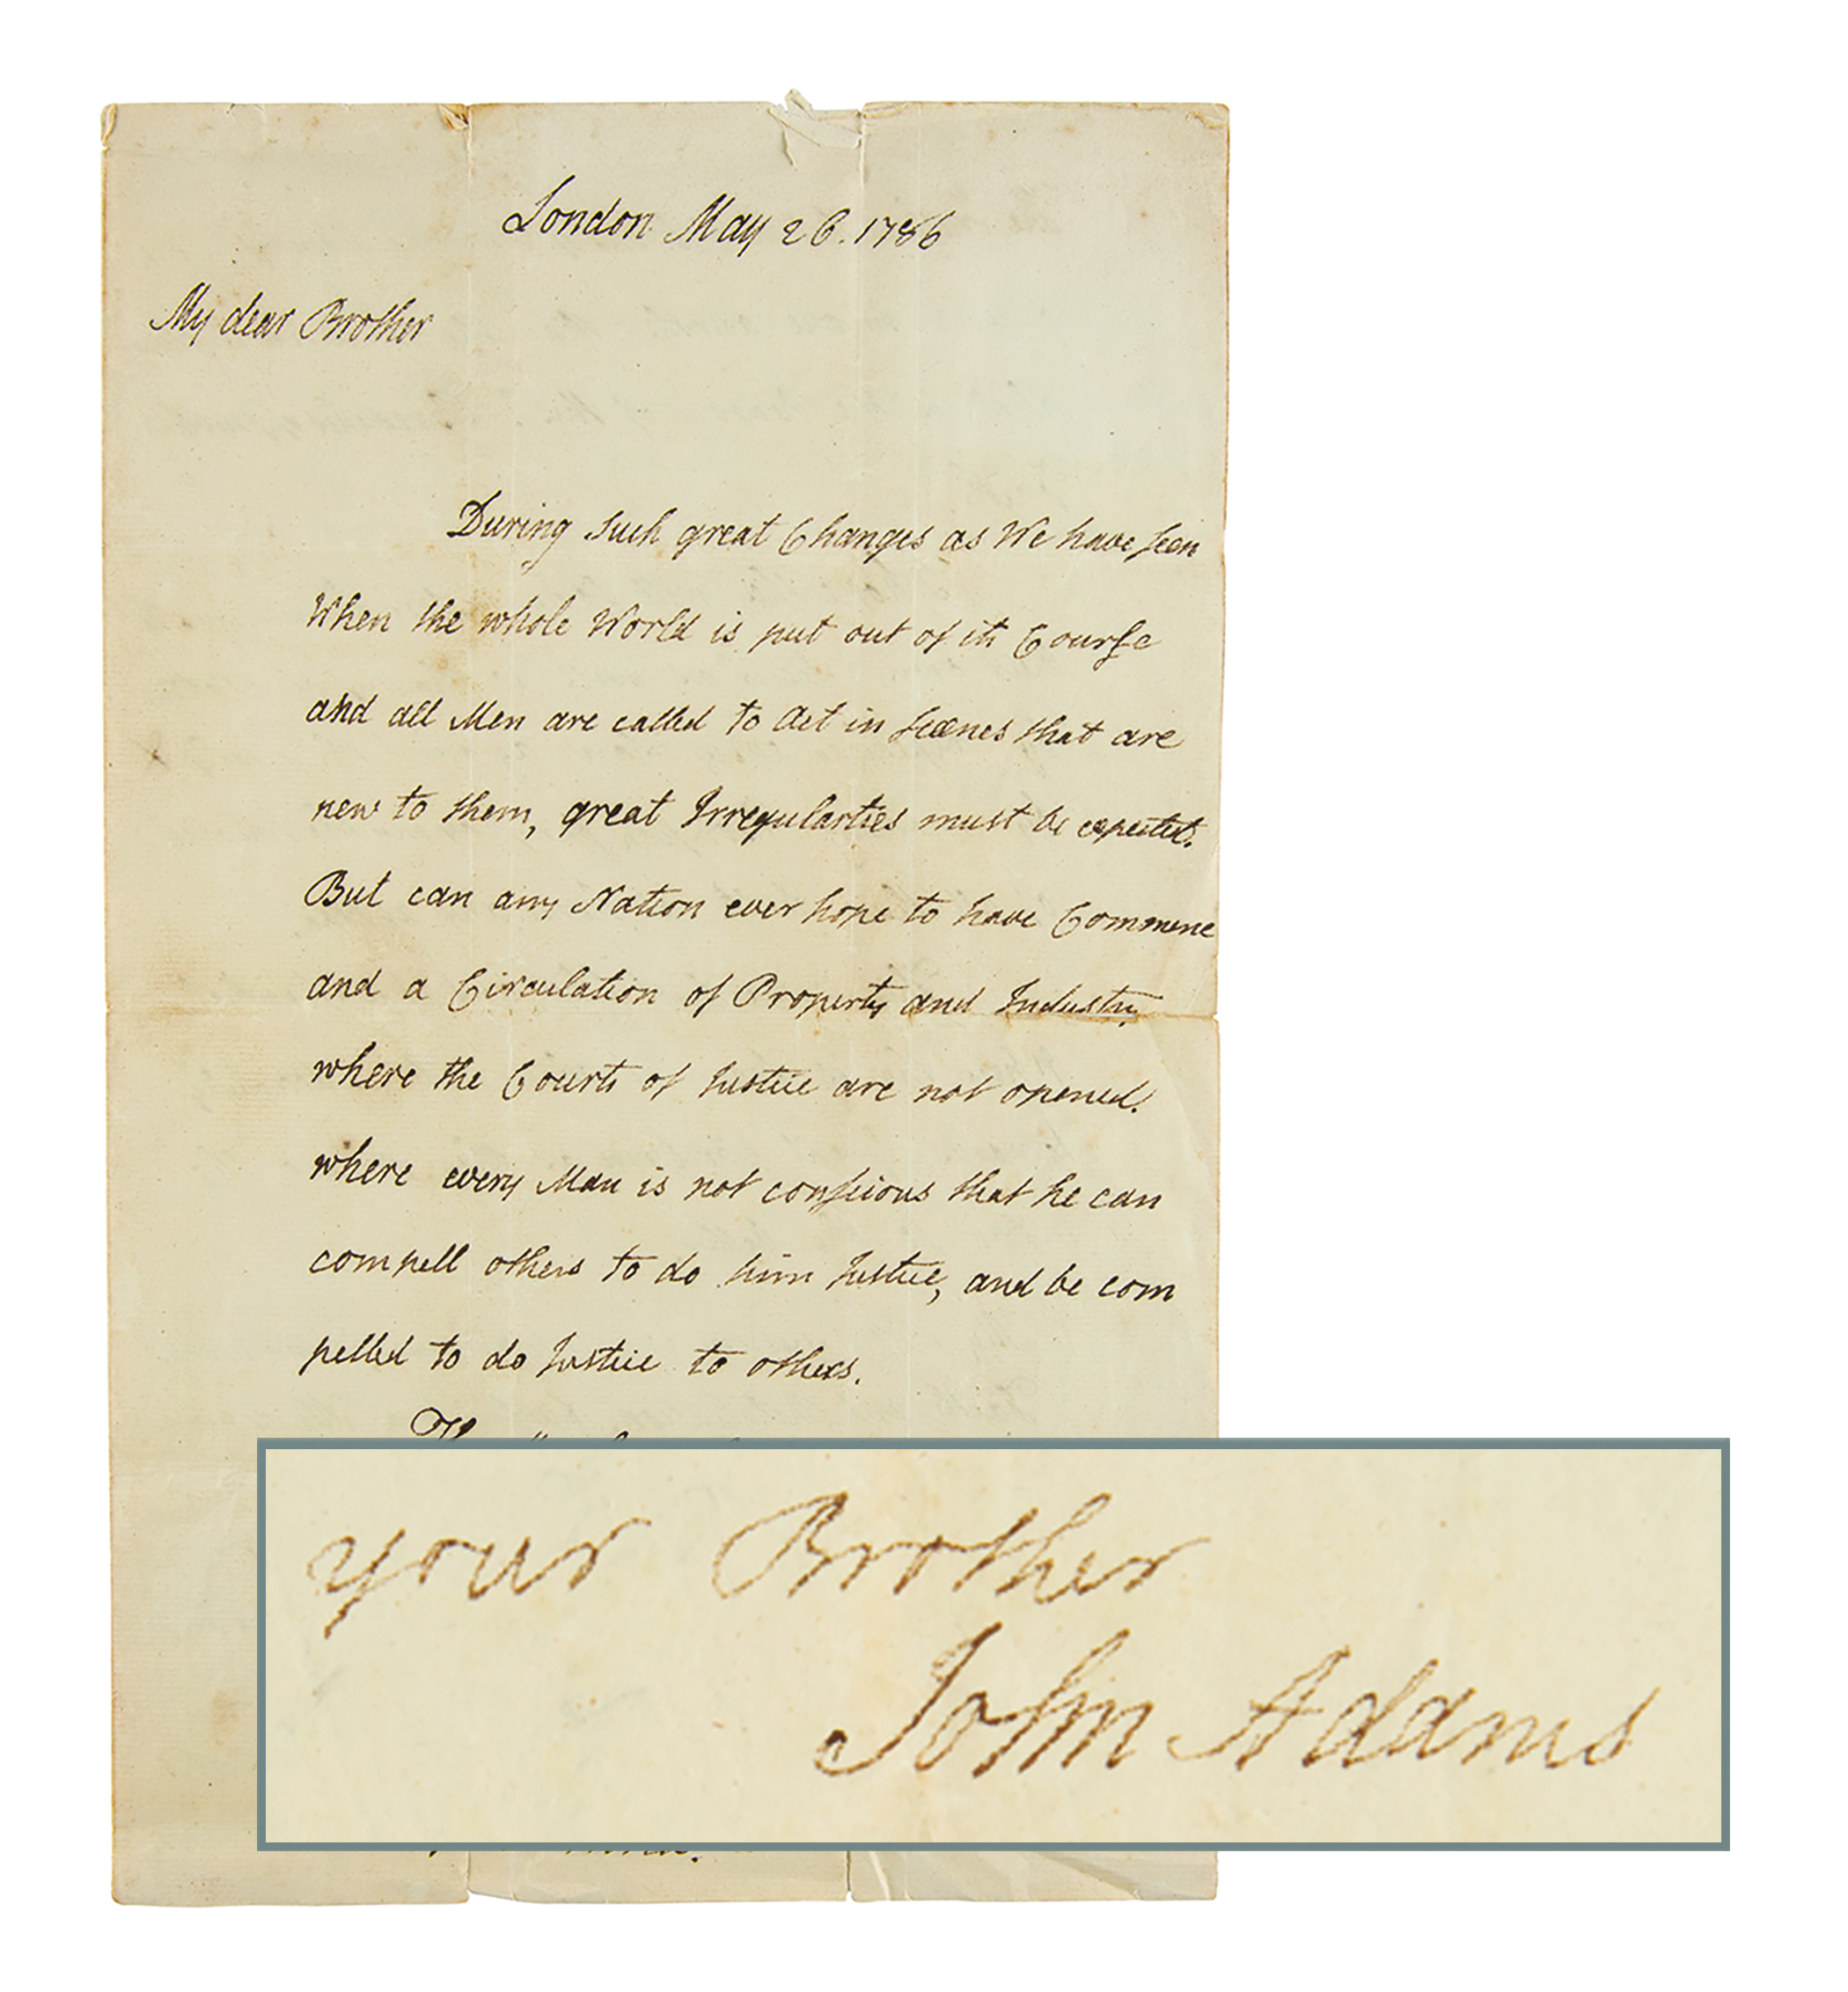 Lot #6001 John Adams Autograph Letter Signed on Debt Defaults Under Treaty of Paris: "The Morals of the People of America have been proved to be defective" - Image 1